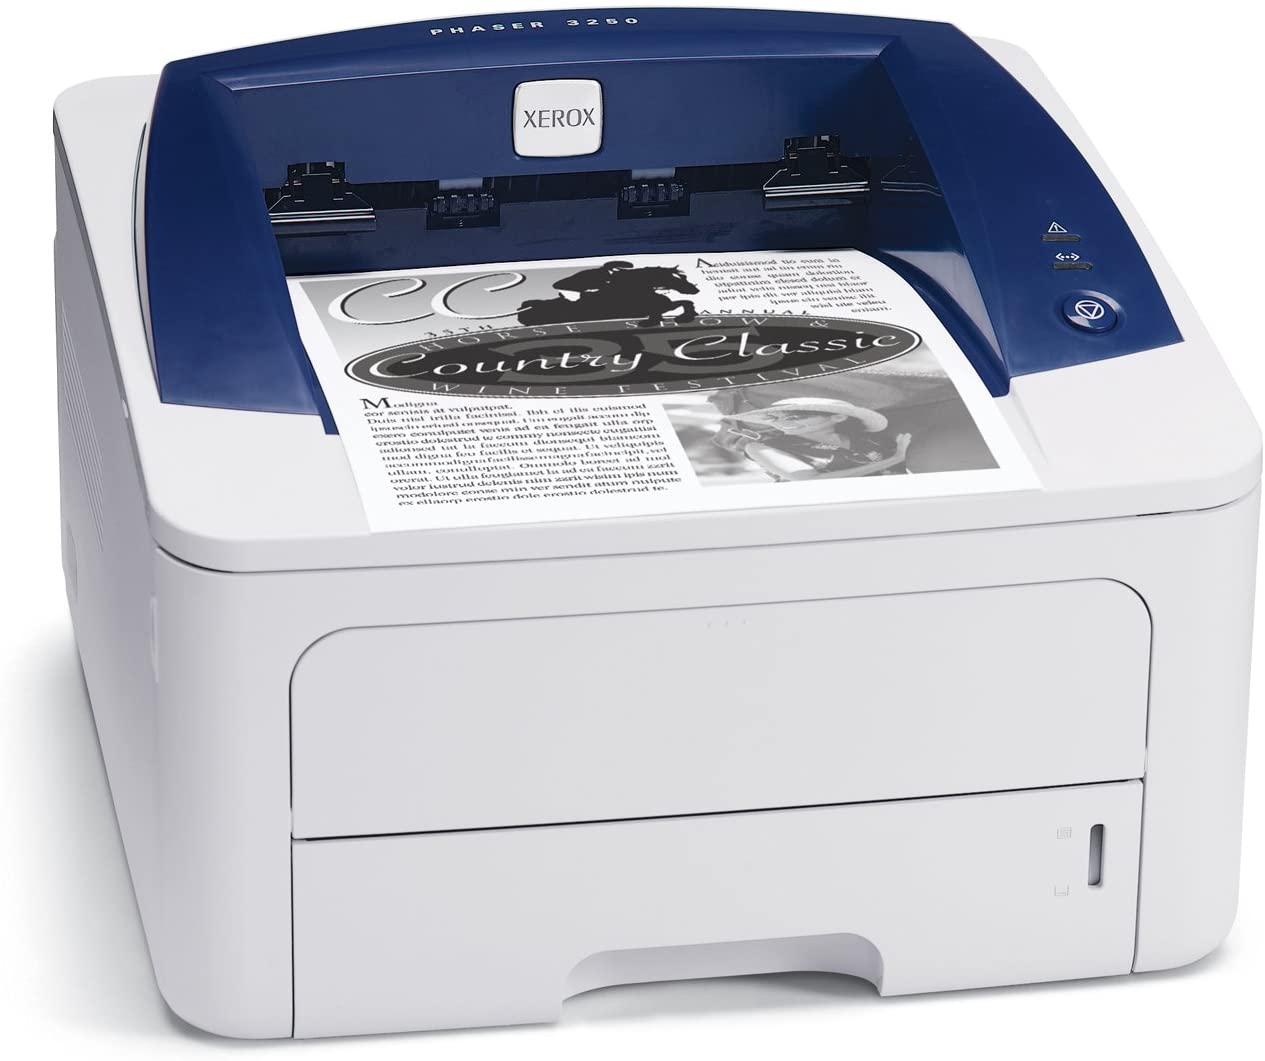 XEROX PHASER 3250D B/W Laser Printer 1200 DPI 30 PPM AND AUTOMATIC DUPLEX